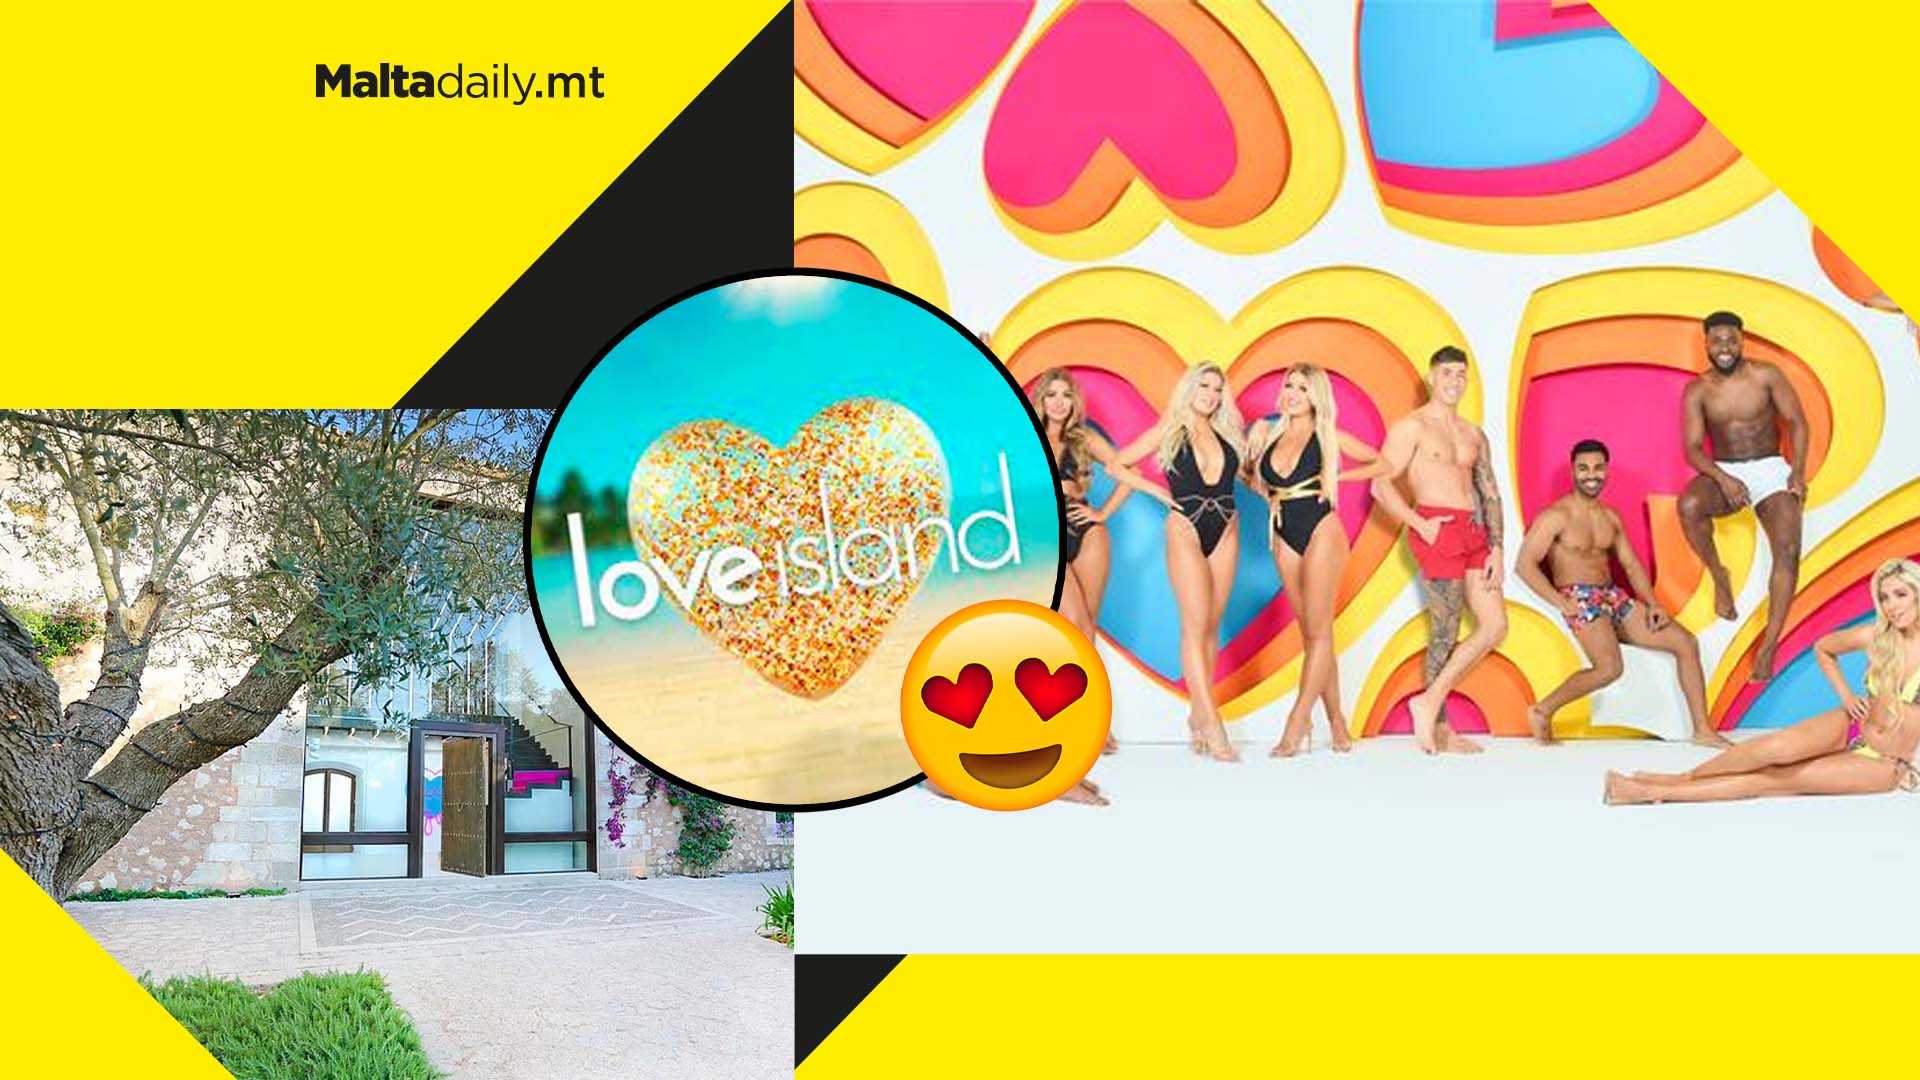 Love Island returns on June 6th and will run for an extra 2 weeks